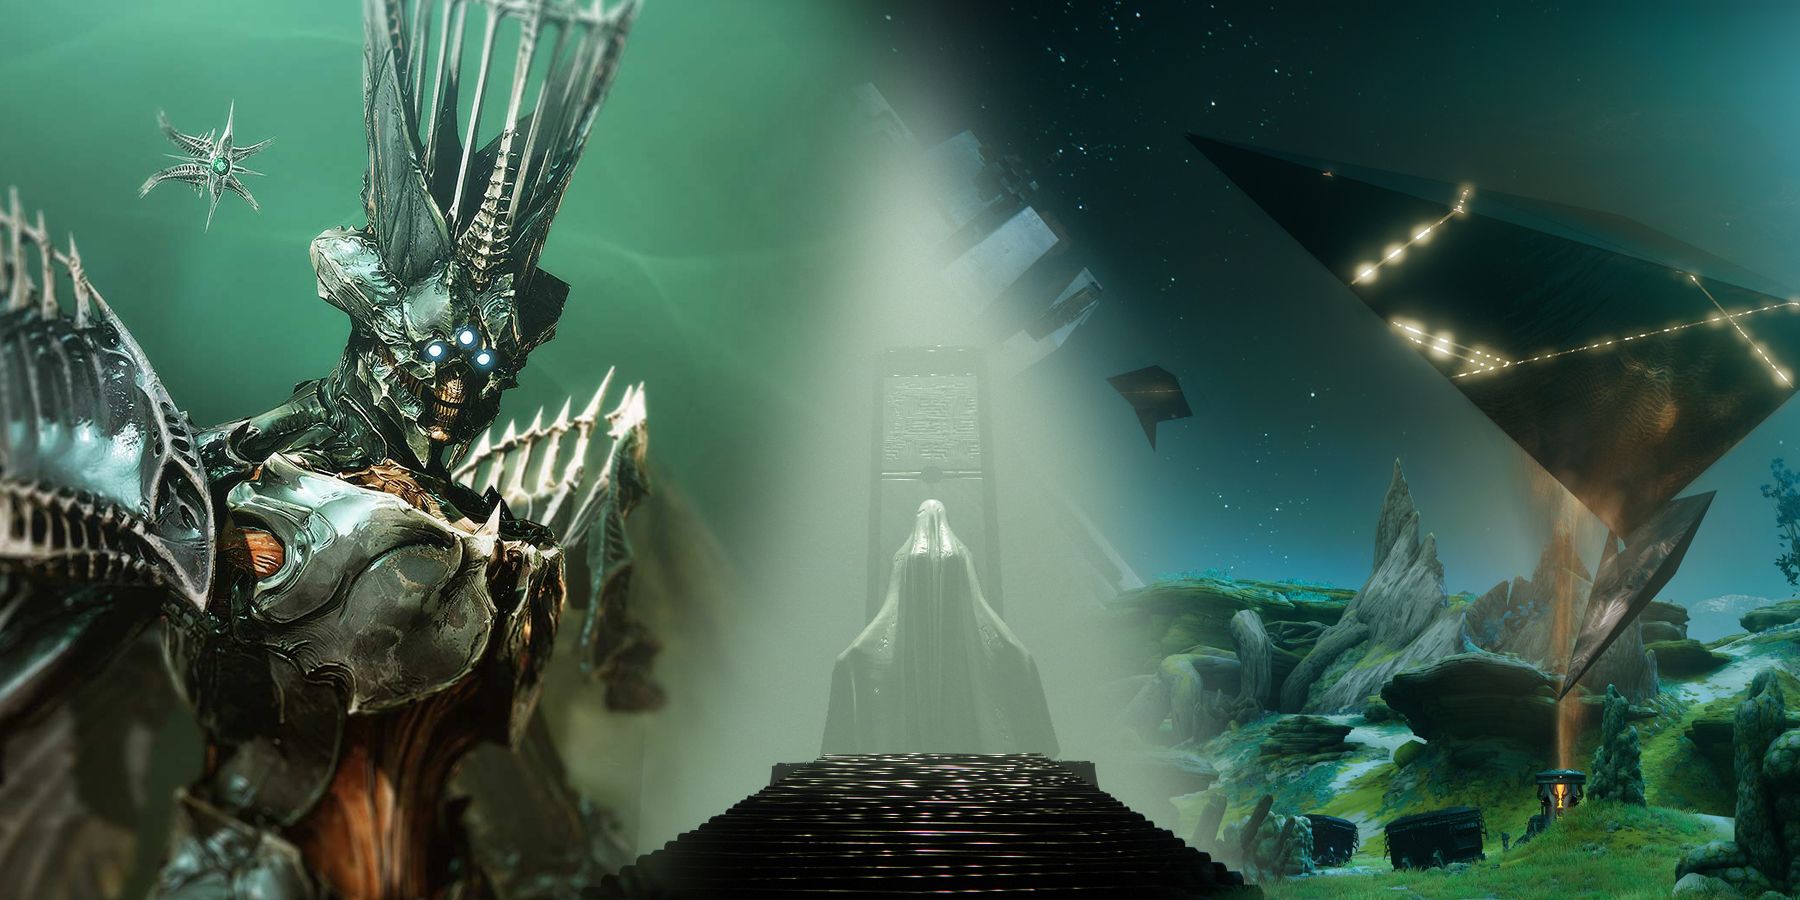 From left to right: Savathun with a Hive Ghost, a Darkness statue inside the Pyramid on the Moon, and a monolith event from Season of Arrivals in Destiny 2.